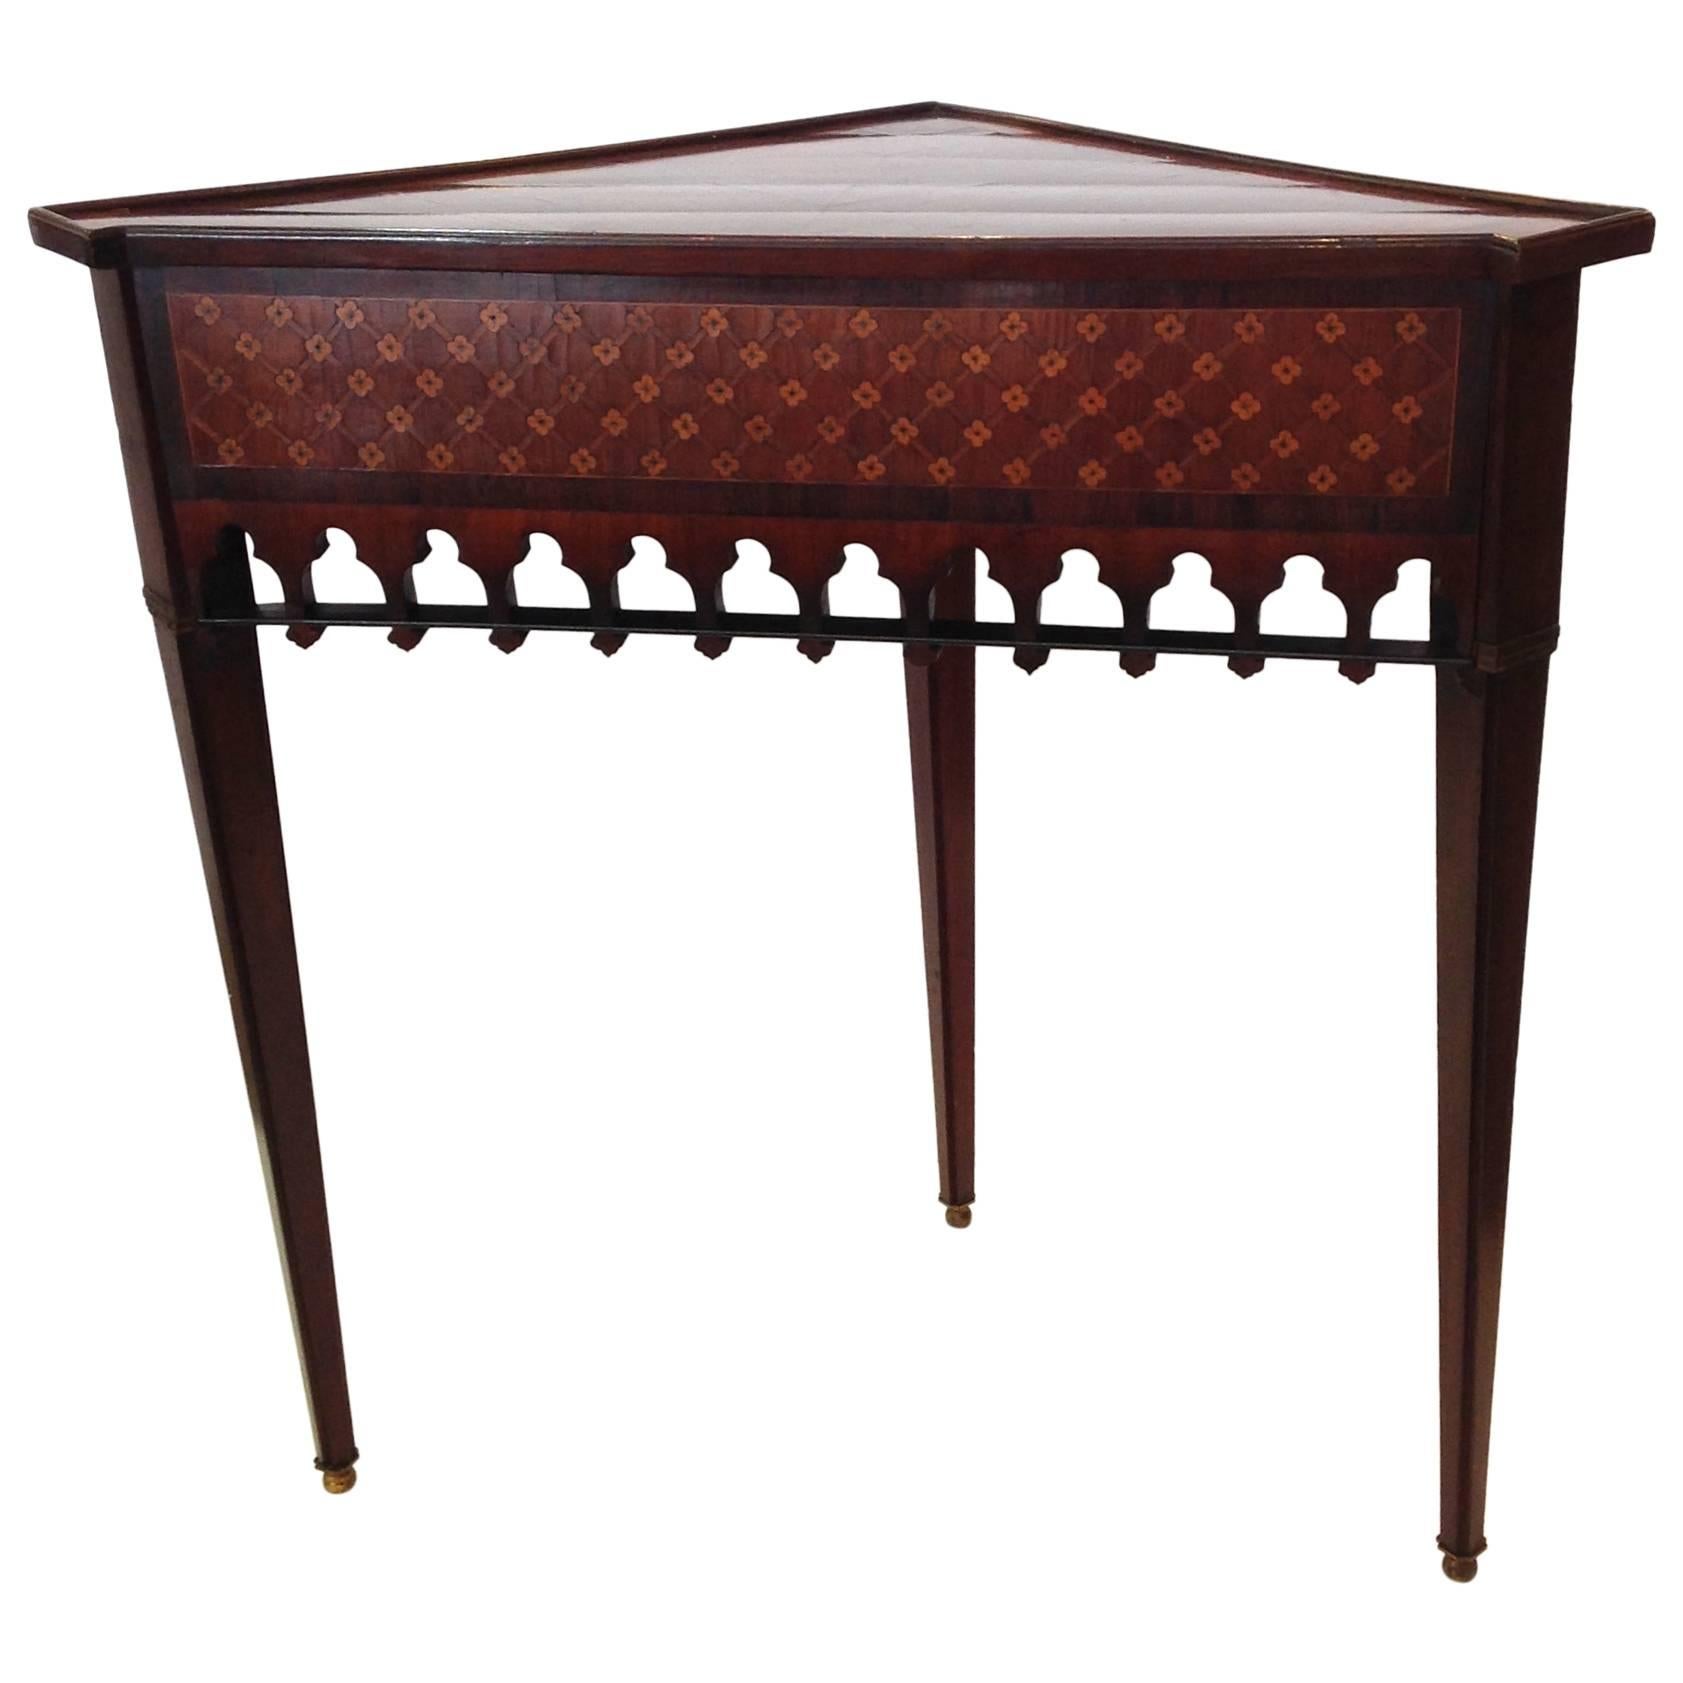 Gothic Revival Corner Table For Sale